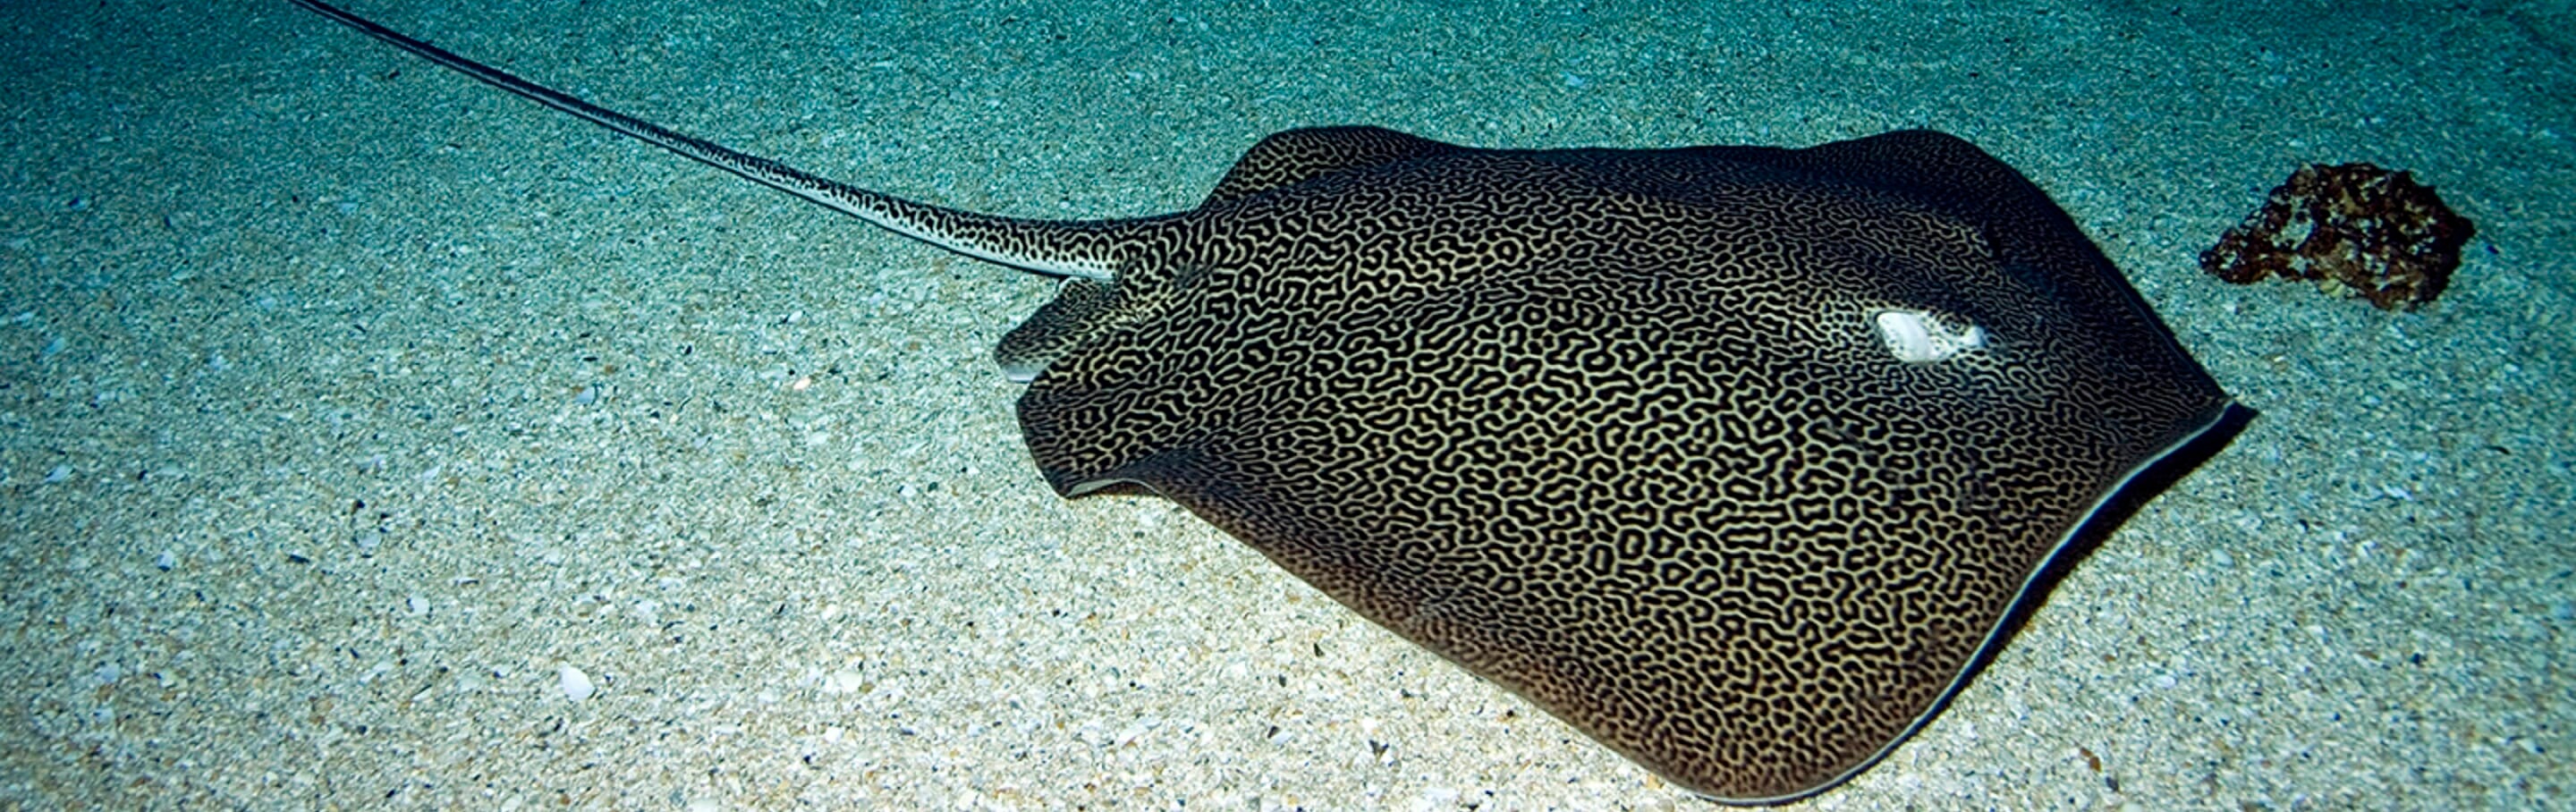 leopard-whipray